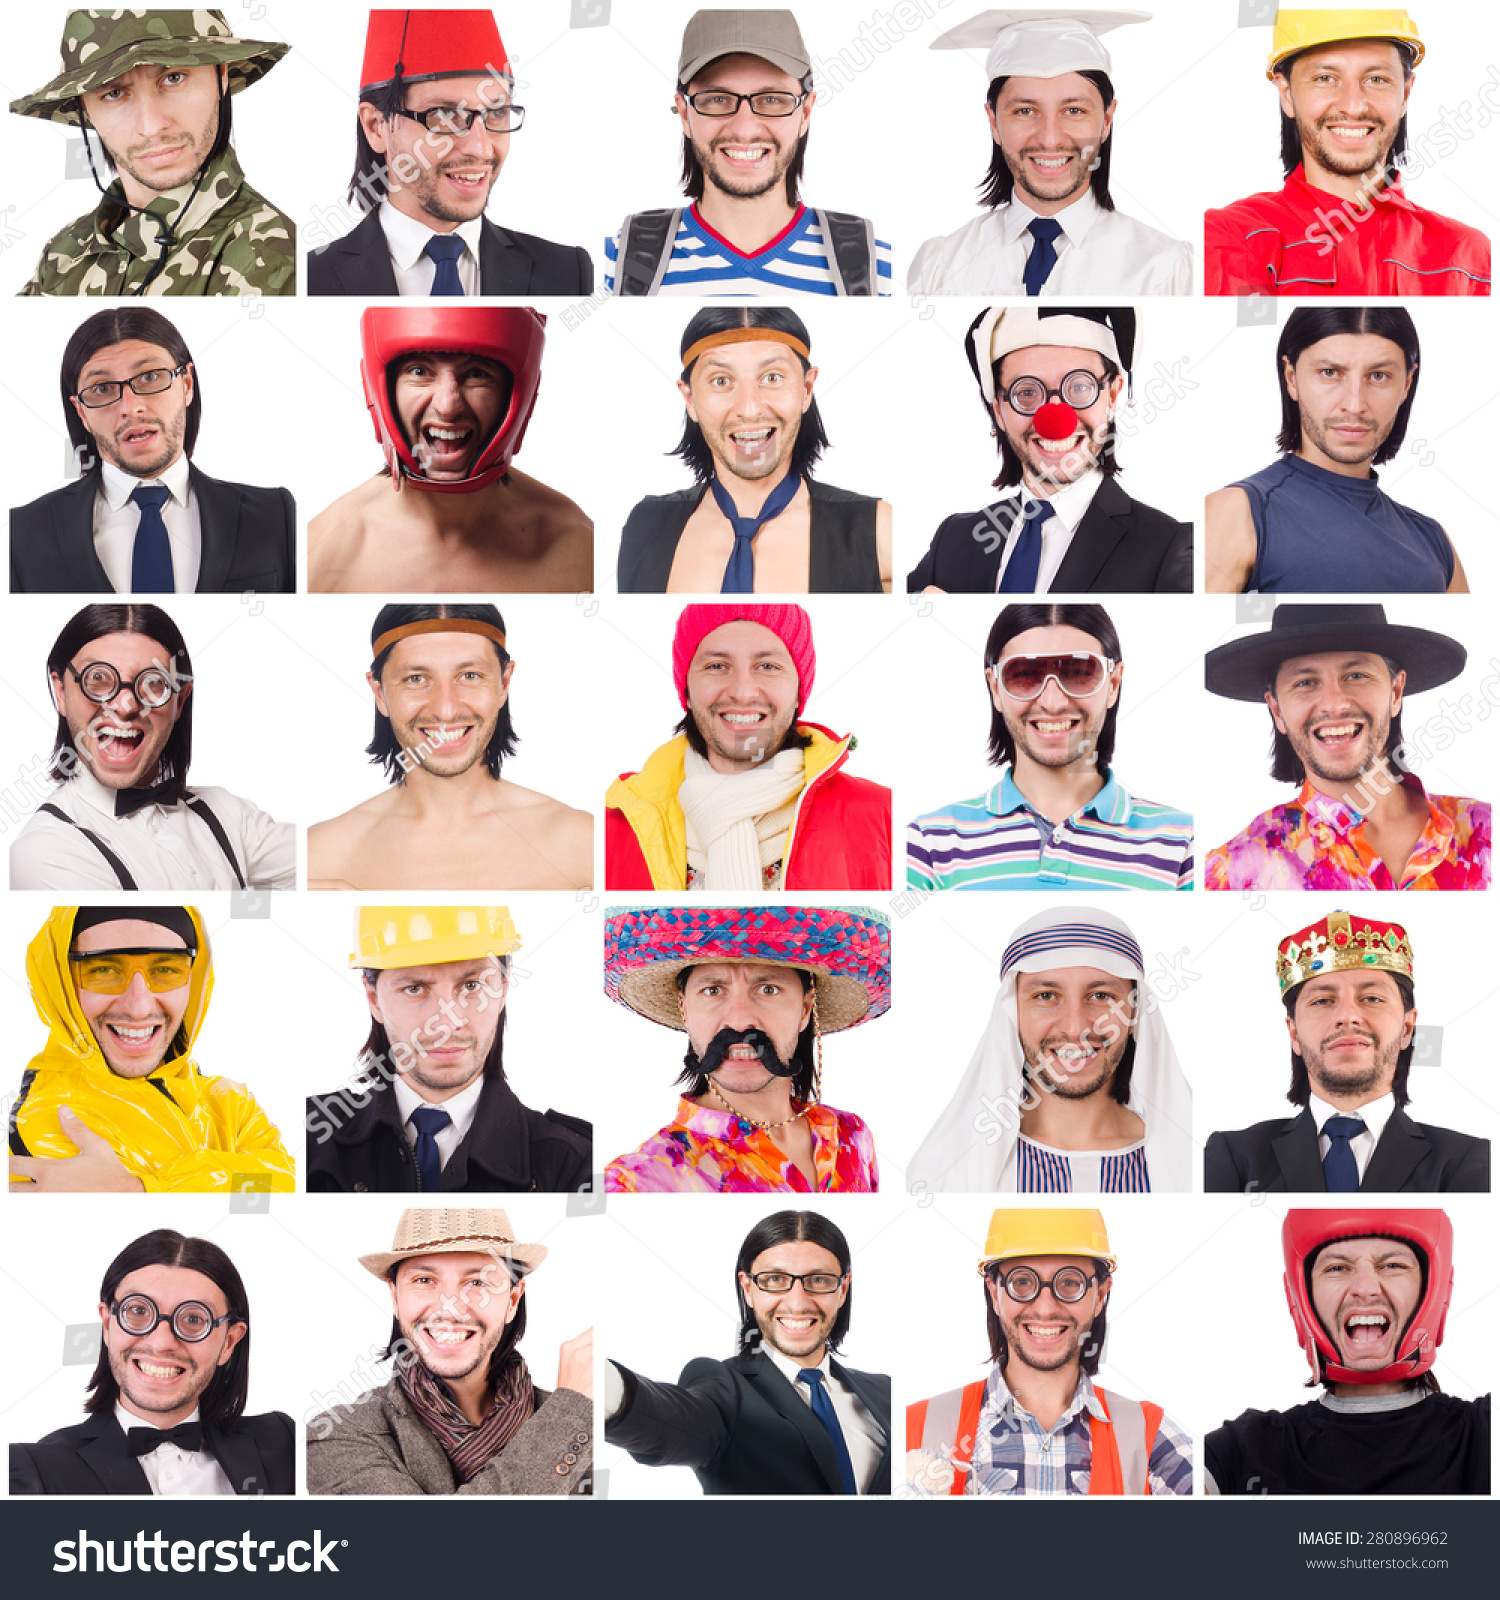 Collage Many Faces Same Model Stock Photo (Royalty Free) 280896962 ...